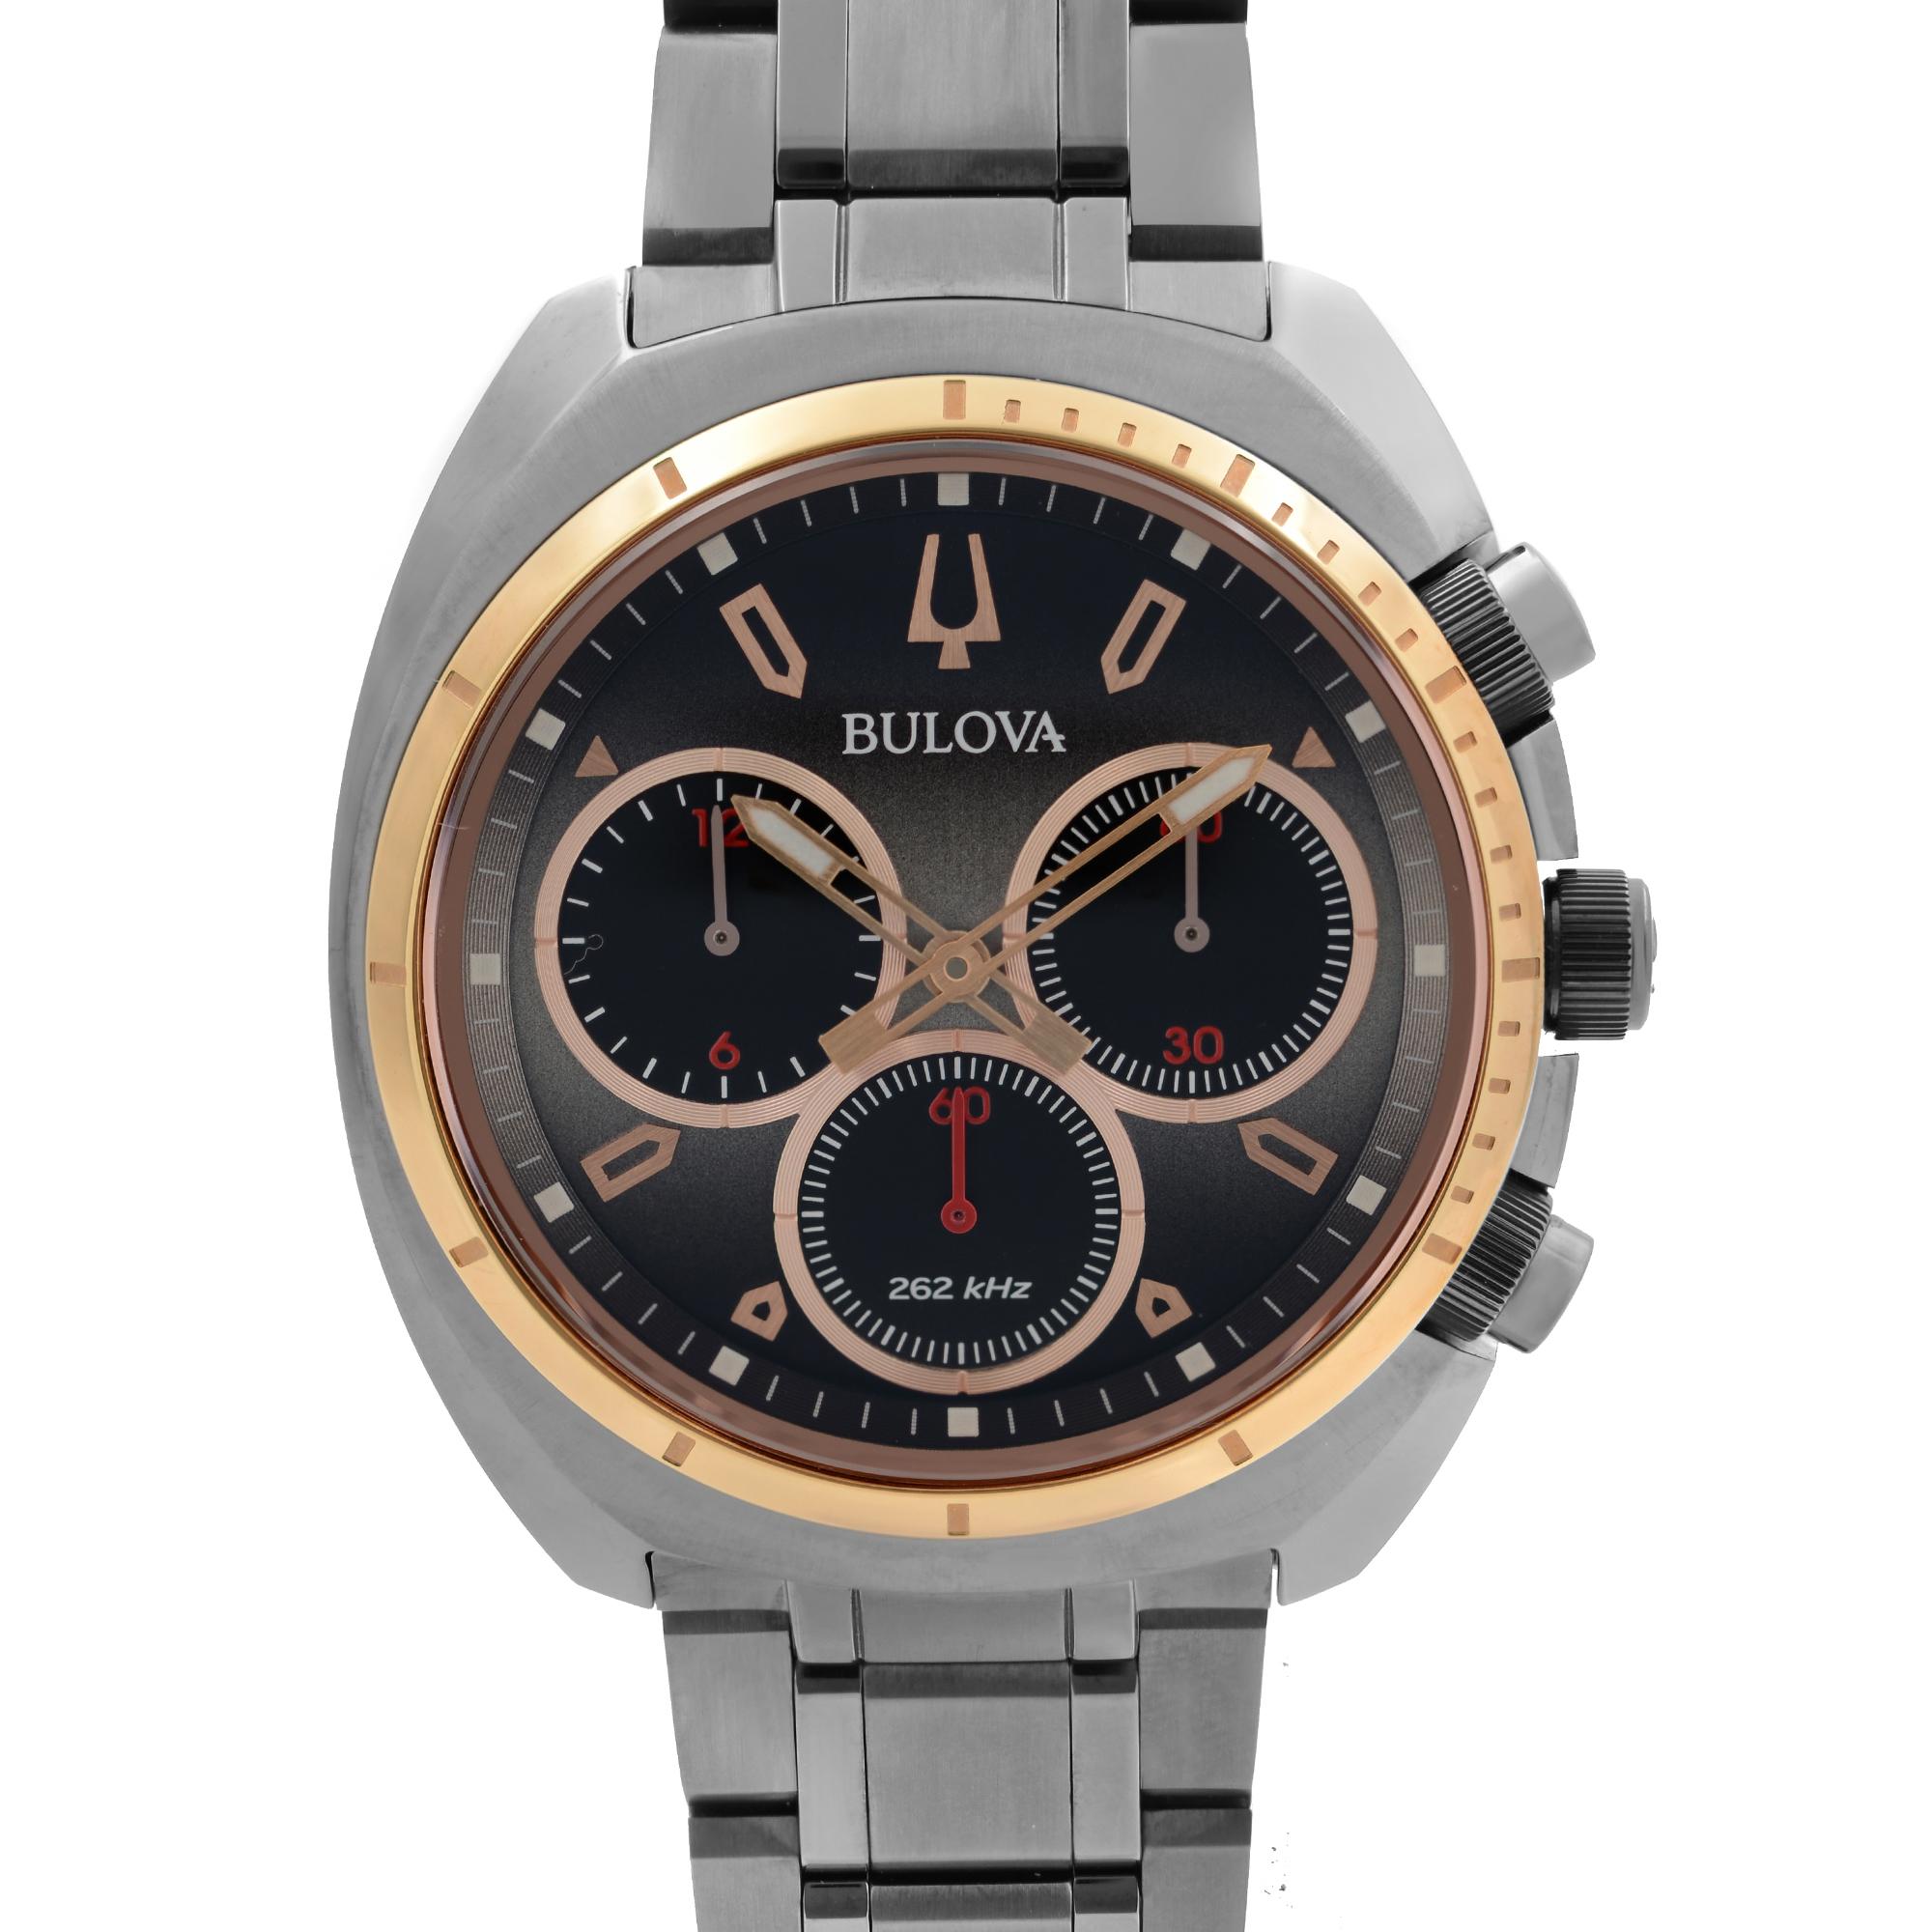 Display Model Bulova Curv 98A158. The Watch Has Minor Blemishes Due to Store Handling. This Beautiful Timepiece Features: Grey Ion-Plated Stainless Steel Case and Bracelet. Fixed Rose Gold-Tone Stainless Steel Bezel. Dark Grey Dial with Luminous